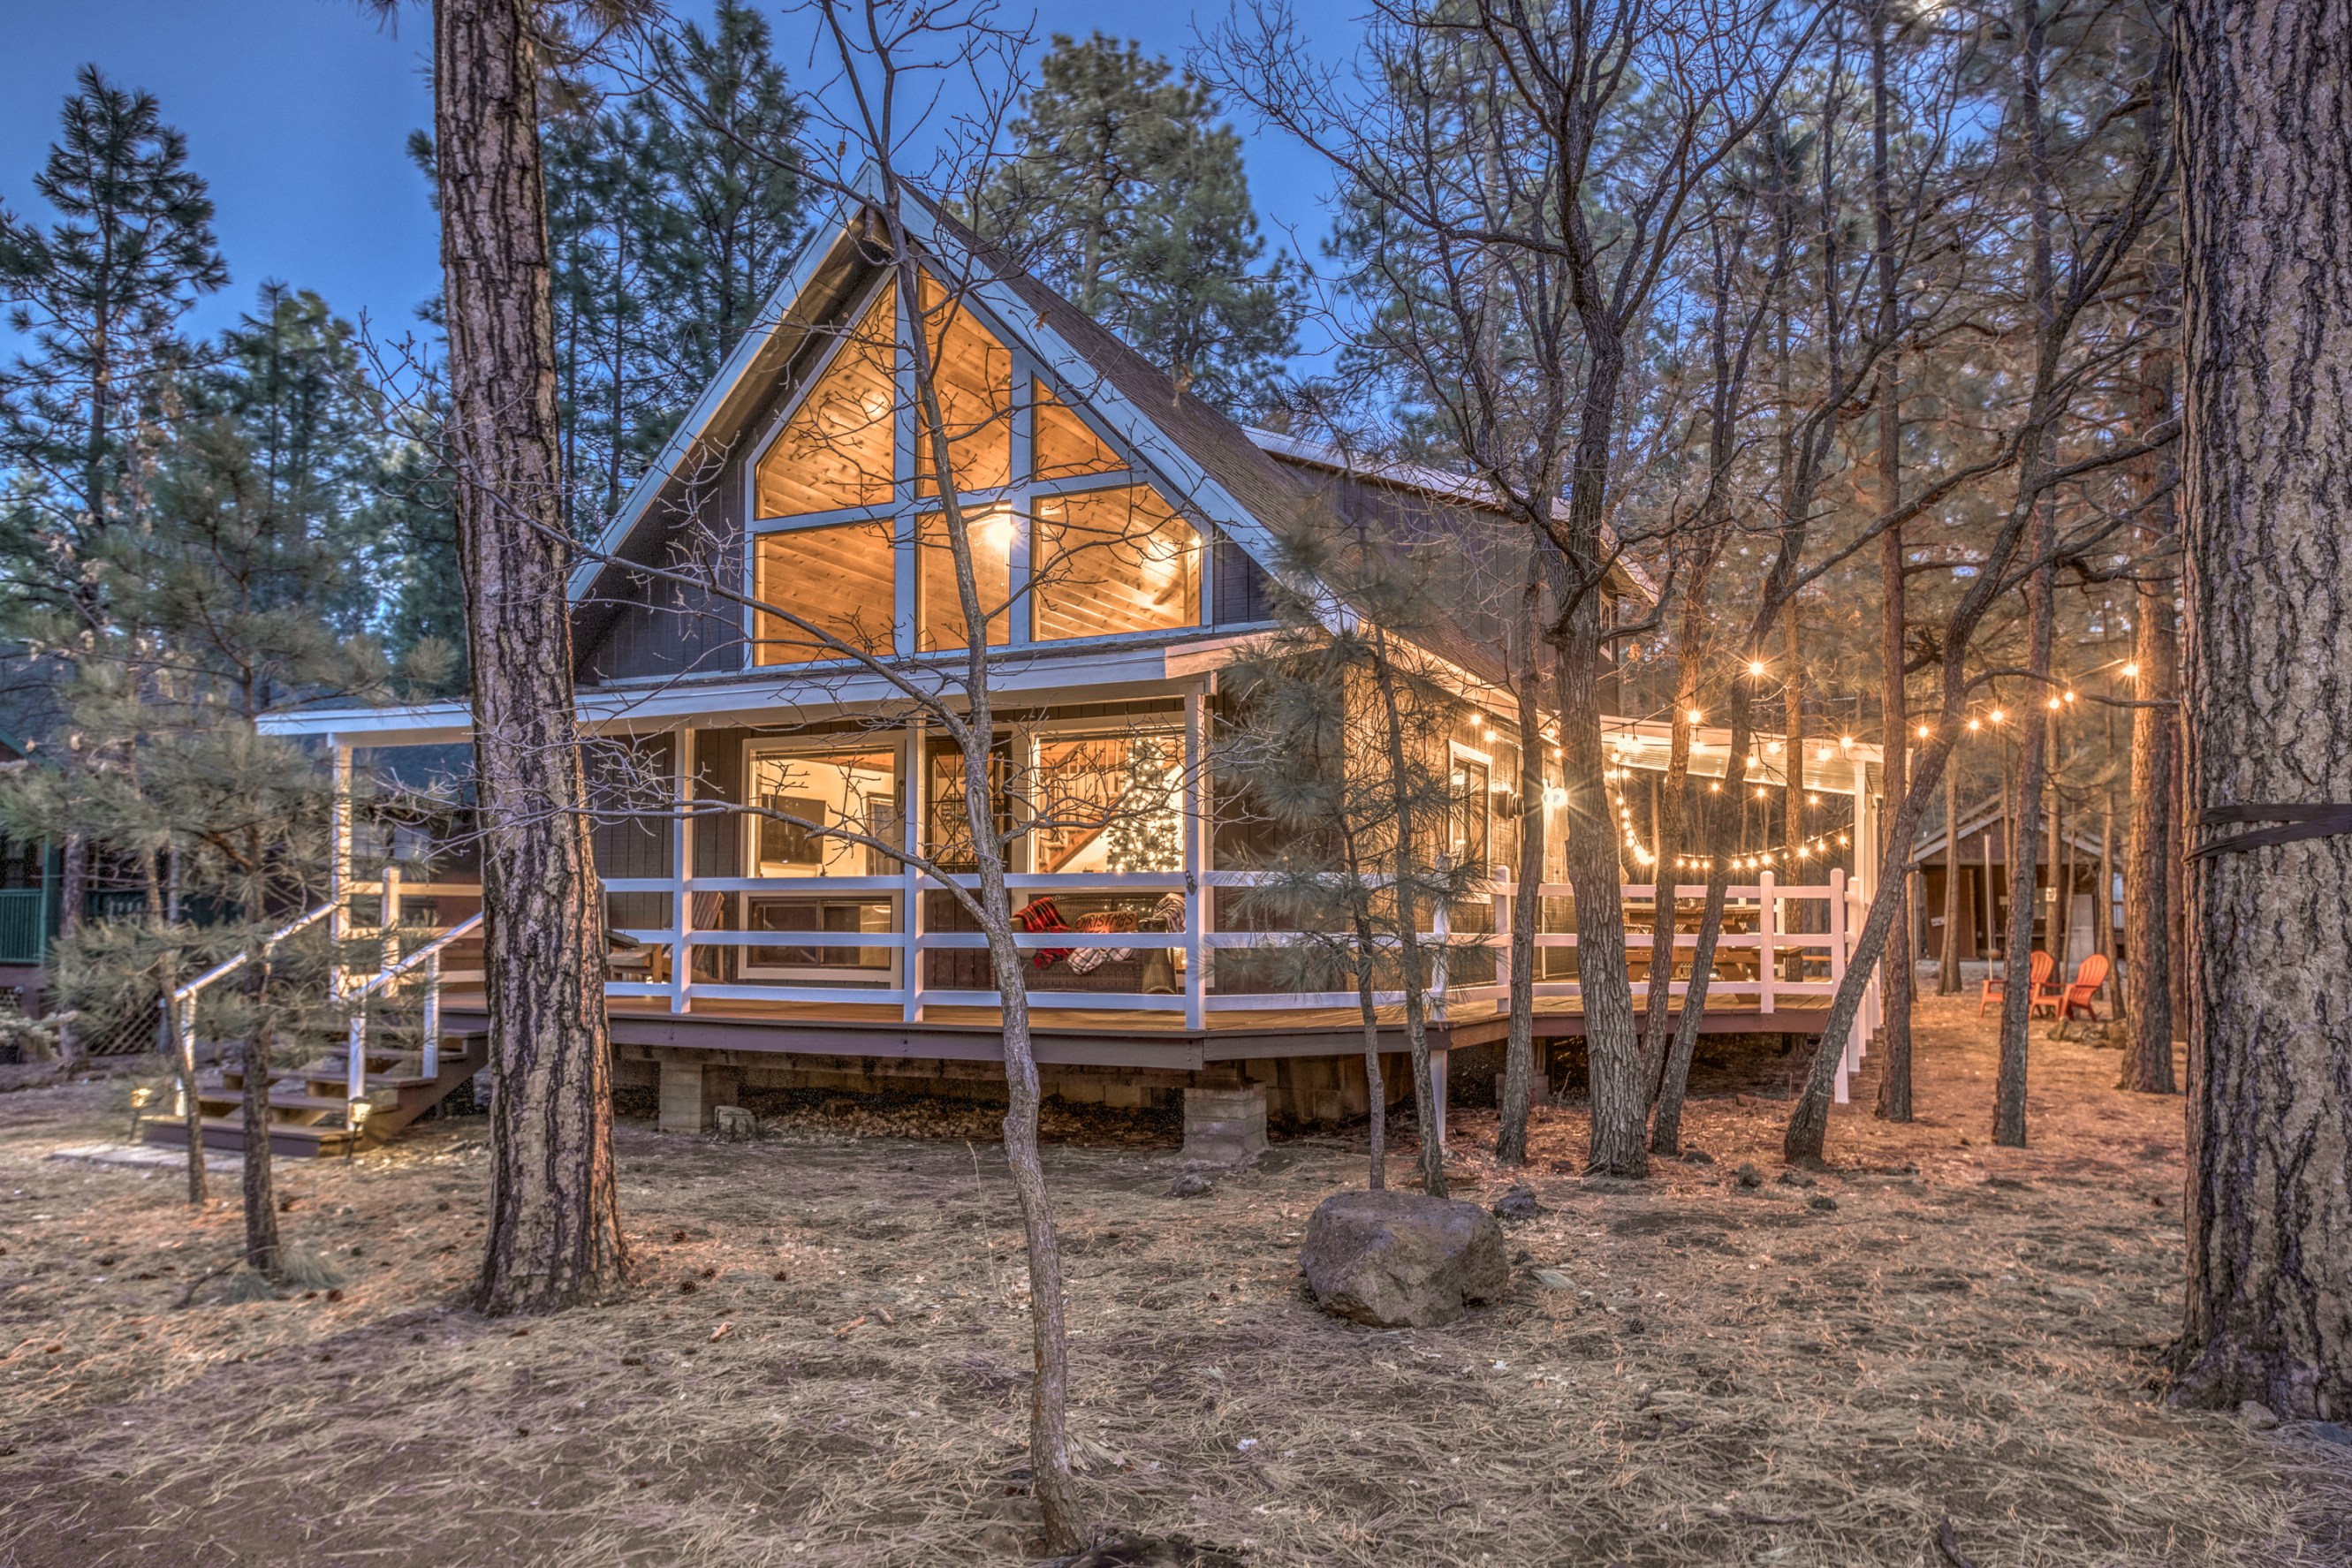 Well-lit cabin in the woods with a wraparound porch